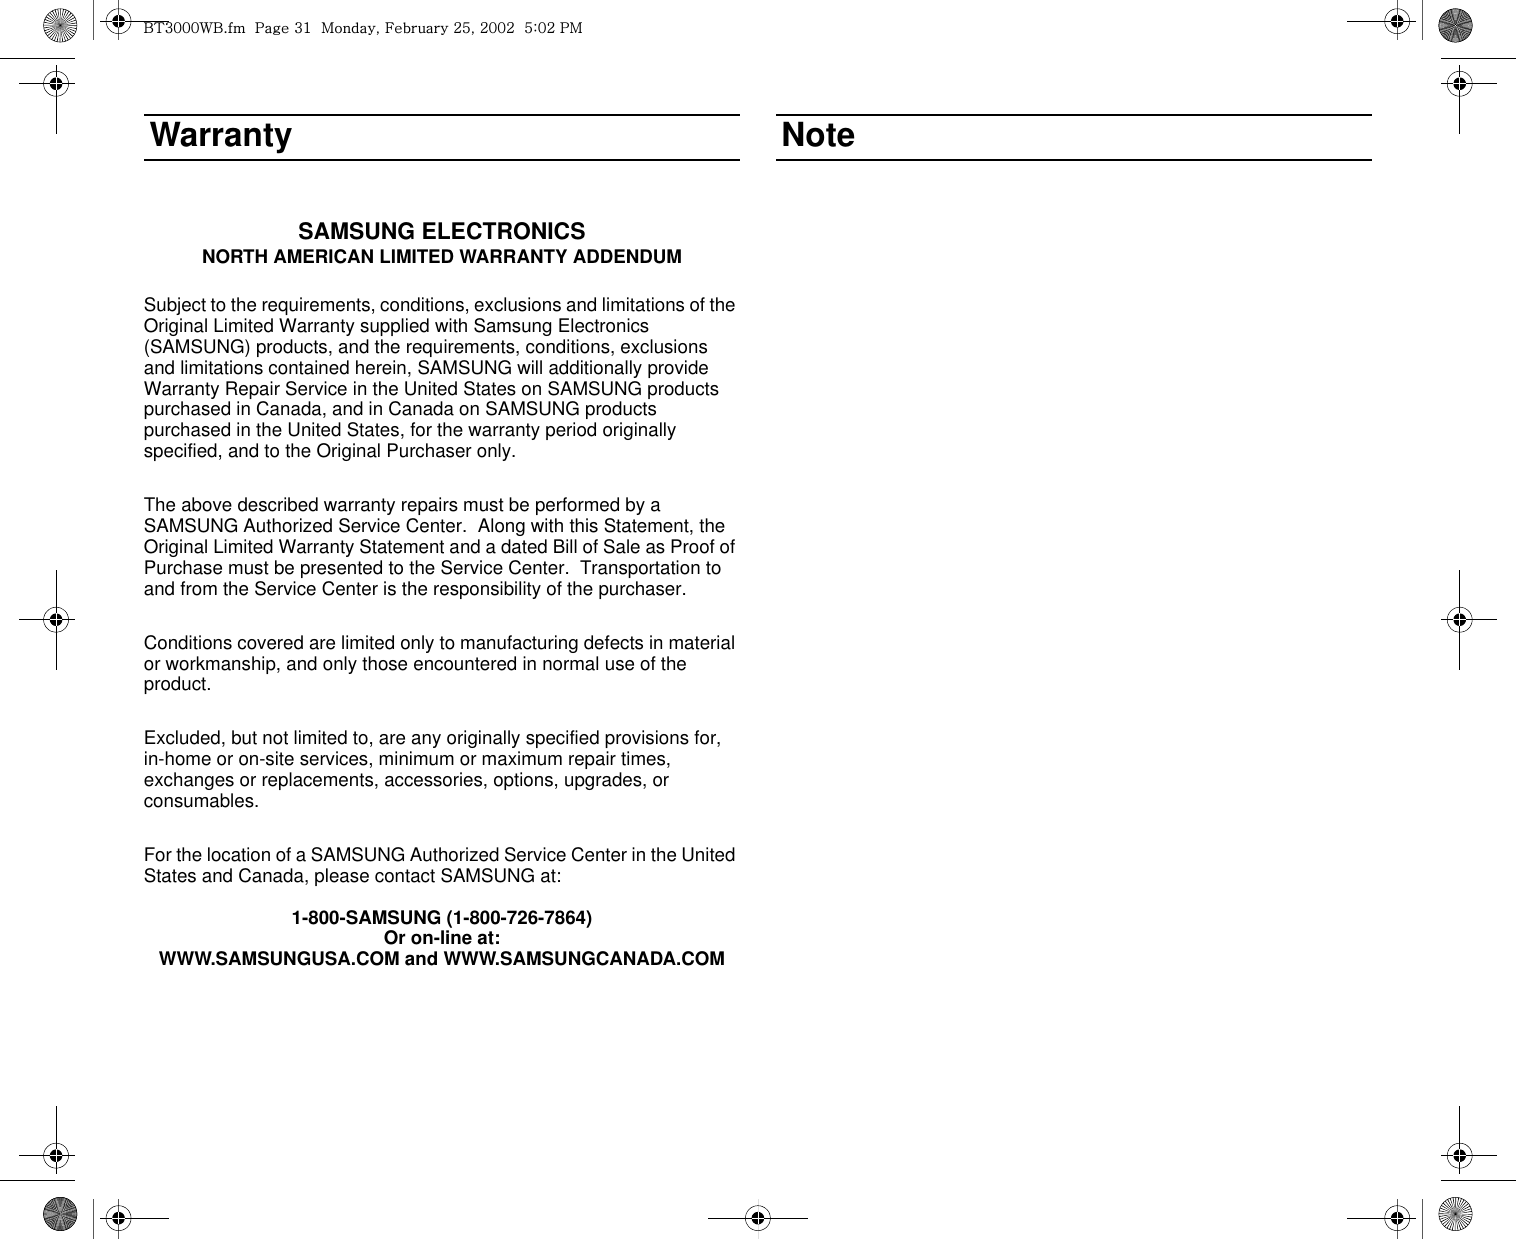 WarrantySAMSUNG ELECTRONICSNORTH AMERICAN LIMITED WARRANTY ADDENDUMSubject to the requirements, conditions, exclusions and limitations of the Original Limited Warranty supplied with Samsung Electronics (SAMSUNG) products, and the requirements, conditions, exclusions and limitations contained herein, SAMSUNG will additionally provide Warranty Repair Service in the United States on SAMSUNG products purchased in Canada, and in Canada on SAMSUNG products purchased in the United States, for the warranty period originally specified, and to the Original Purchaser only.The above described warranty repairs must be performed by a SAMSUNG Authorized Service Center.  Along with this Statement, the Original Limited Warranty Statement and a dated Bill of Sale as Proof of Purchase must be presented to the Service Center.  Transportation to and from the Service Center is the responsibility of the purchaser.Conditions covered are limited only to manufacturing defects in material or workmanship, and only those encountered in normal use of the product.Excluded, but not limited to, are any originally specified provisions for, in-home or on-site services, minimum or maximum repair times, exchanges or replacements, accessories, options, upgrades, or consumables.For the location of a SAMSUNG Authorized Service Center in the United States and Canada, please contact SAMSUNG at:1-800-SAMSUNG (1-800-726-7864)Or on-line at:WWW.SAMSUNGUSA.COM and WWW.SAMSUNGCANADA.COMNotei{ZWWW~iUGGwGZXGGtSGmGY\SGYWWYGG\aWYGwt